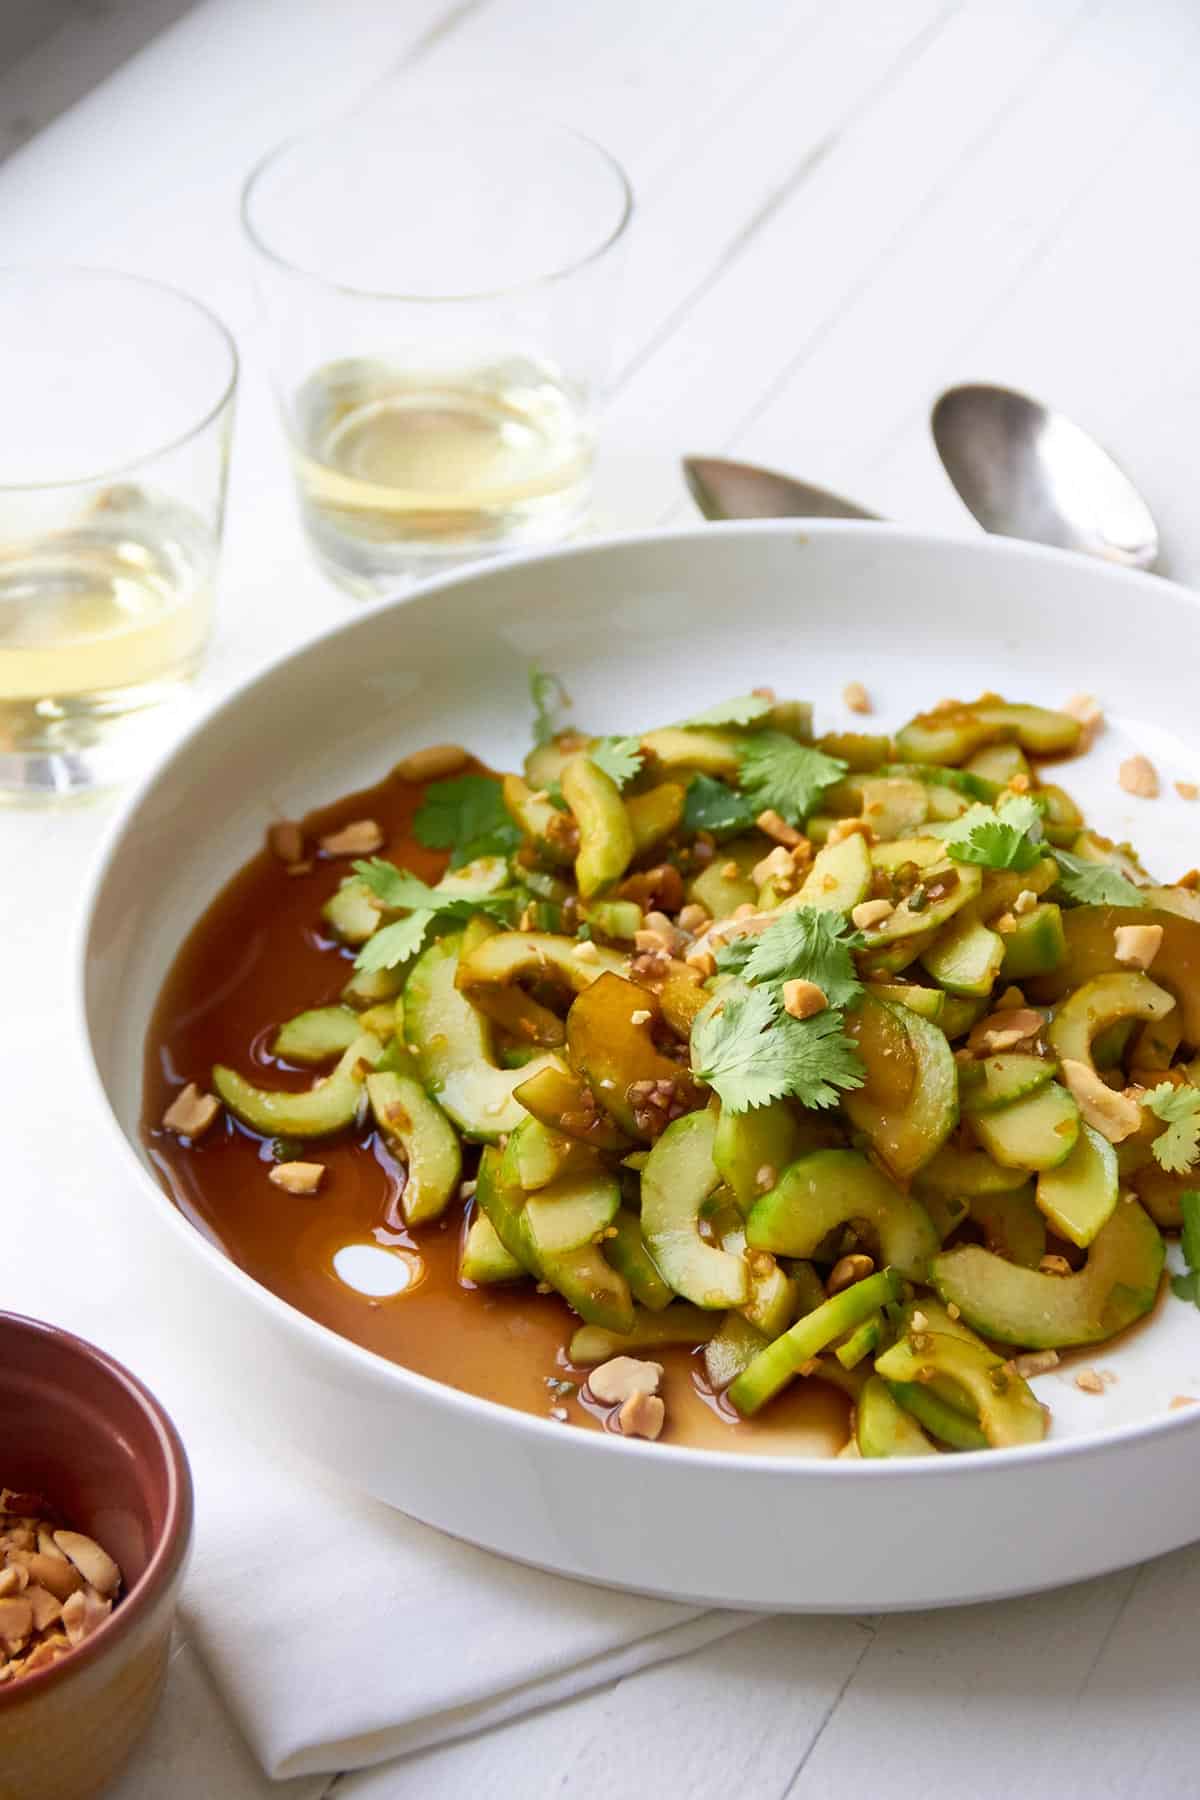 Cucumber salad with Thai sauce in white bowl on table.